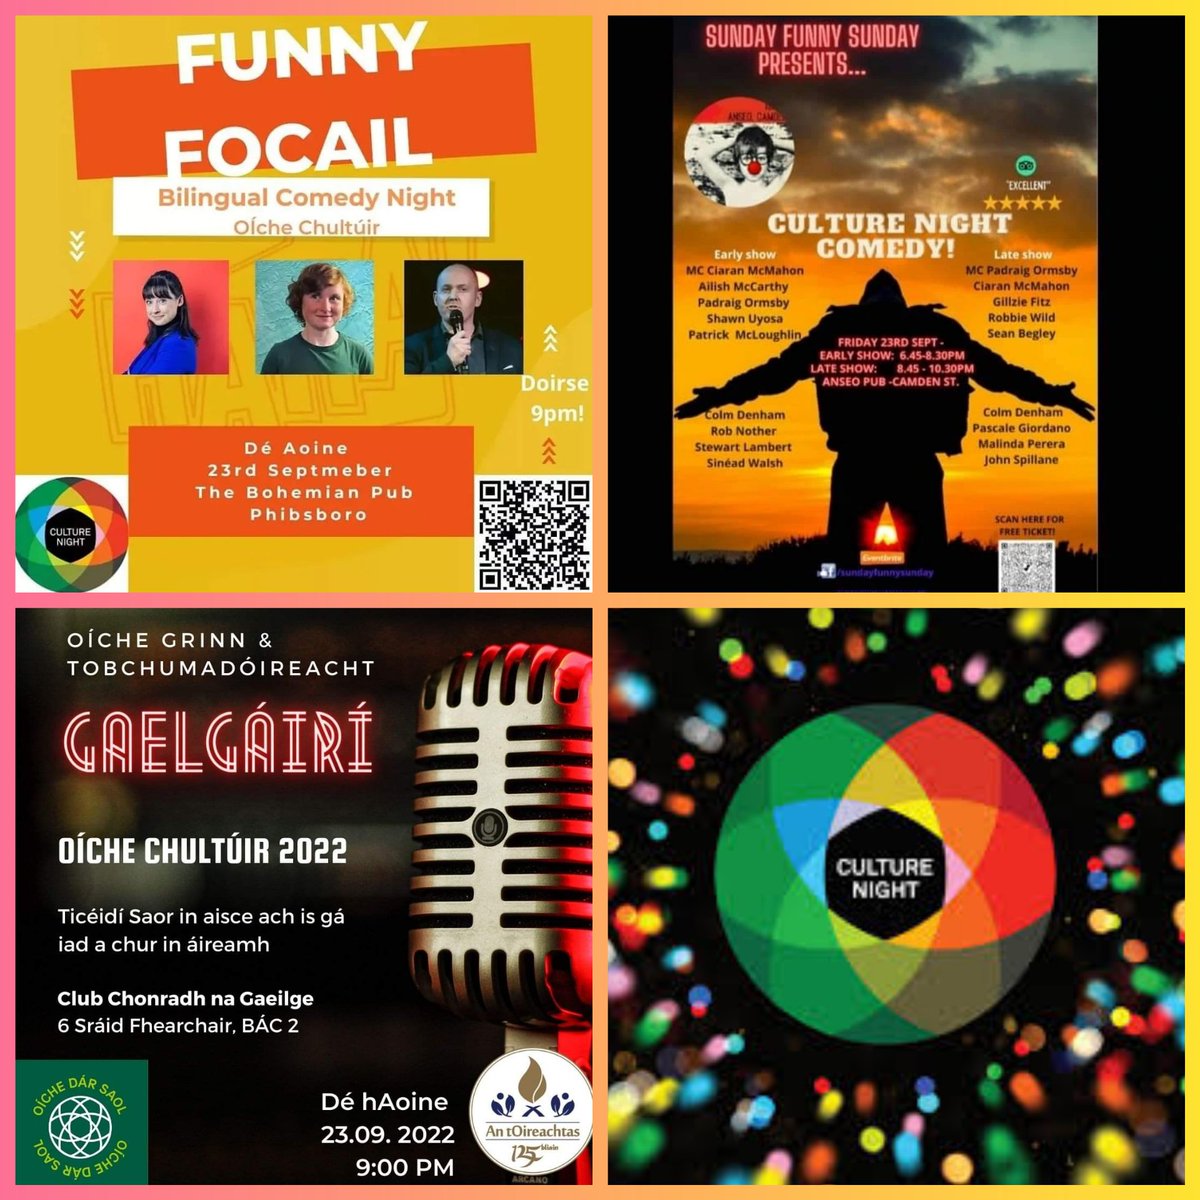 Just in the door after a great night of culture across 3 different venues. Huge thanks 2 @dianeocomedy @ #funnyfocail, @OrmsbyPadraig, Ciaran @ #SunFunnySun & @hughcarrhere @Louelylady @GaelGAIRI . An bhuíoch a bheith roghnaithe. #culturenight #culturenight2022 @CultureNightDub